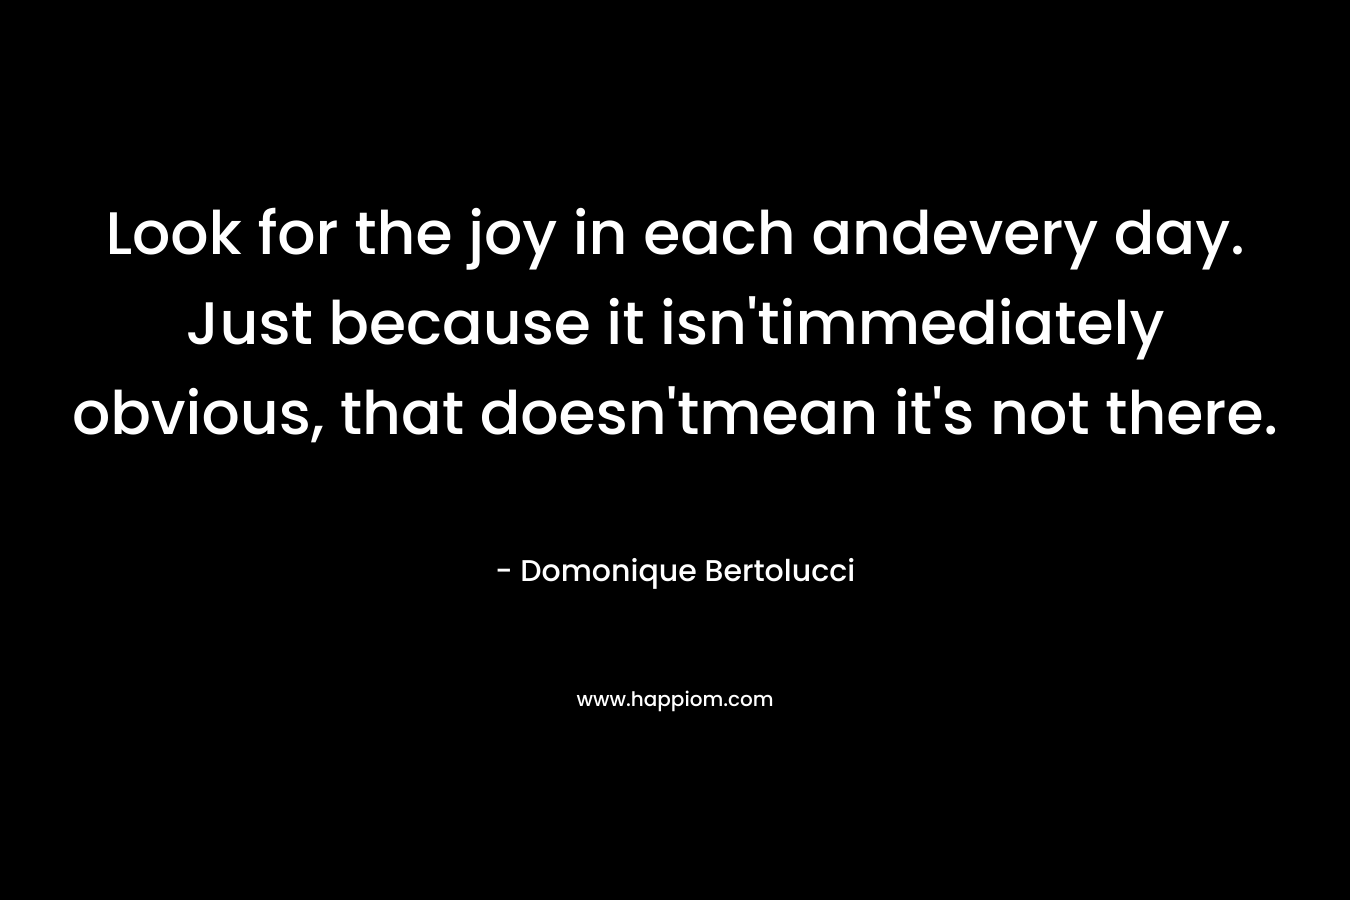 Look for the joy in each andevery day. Just because it isn’timmediately obvious, that doesn’tmean it’s not there. – Domonique Bertolucci